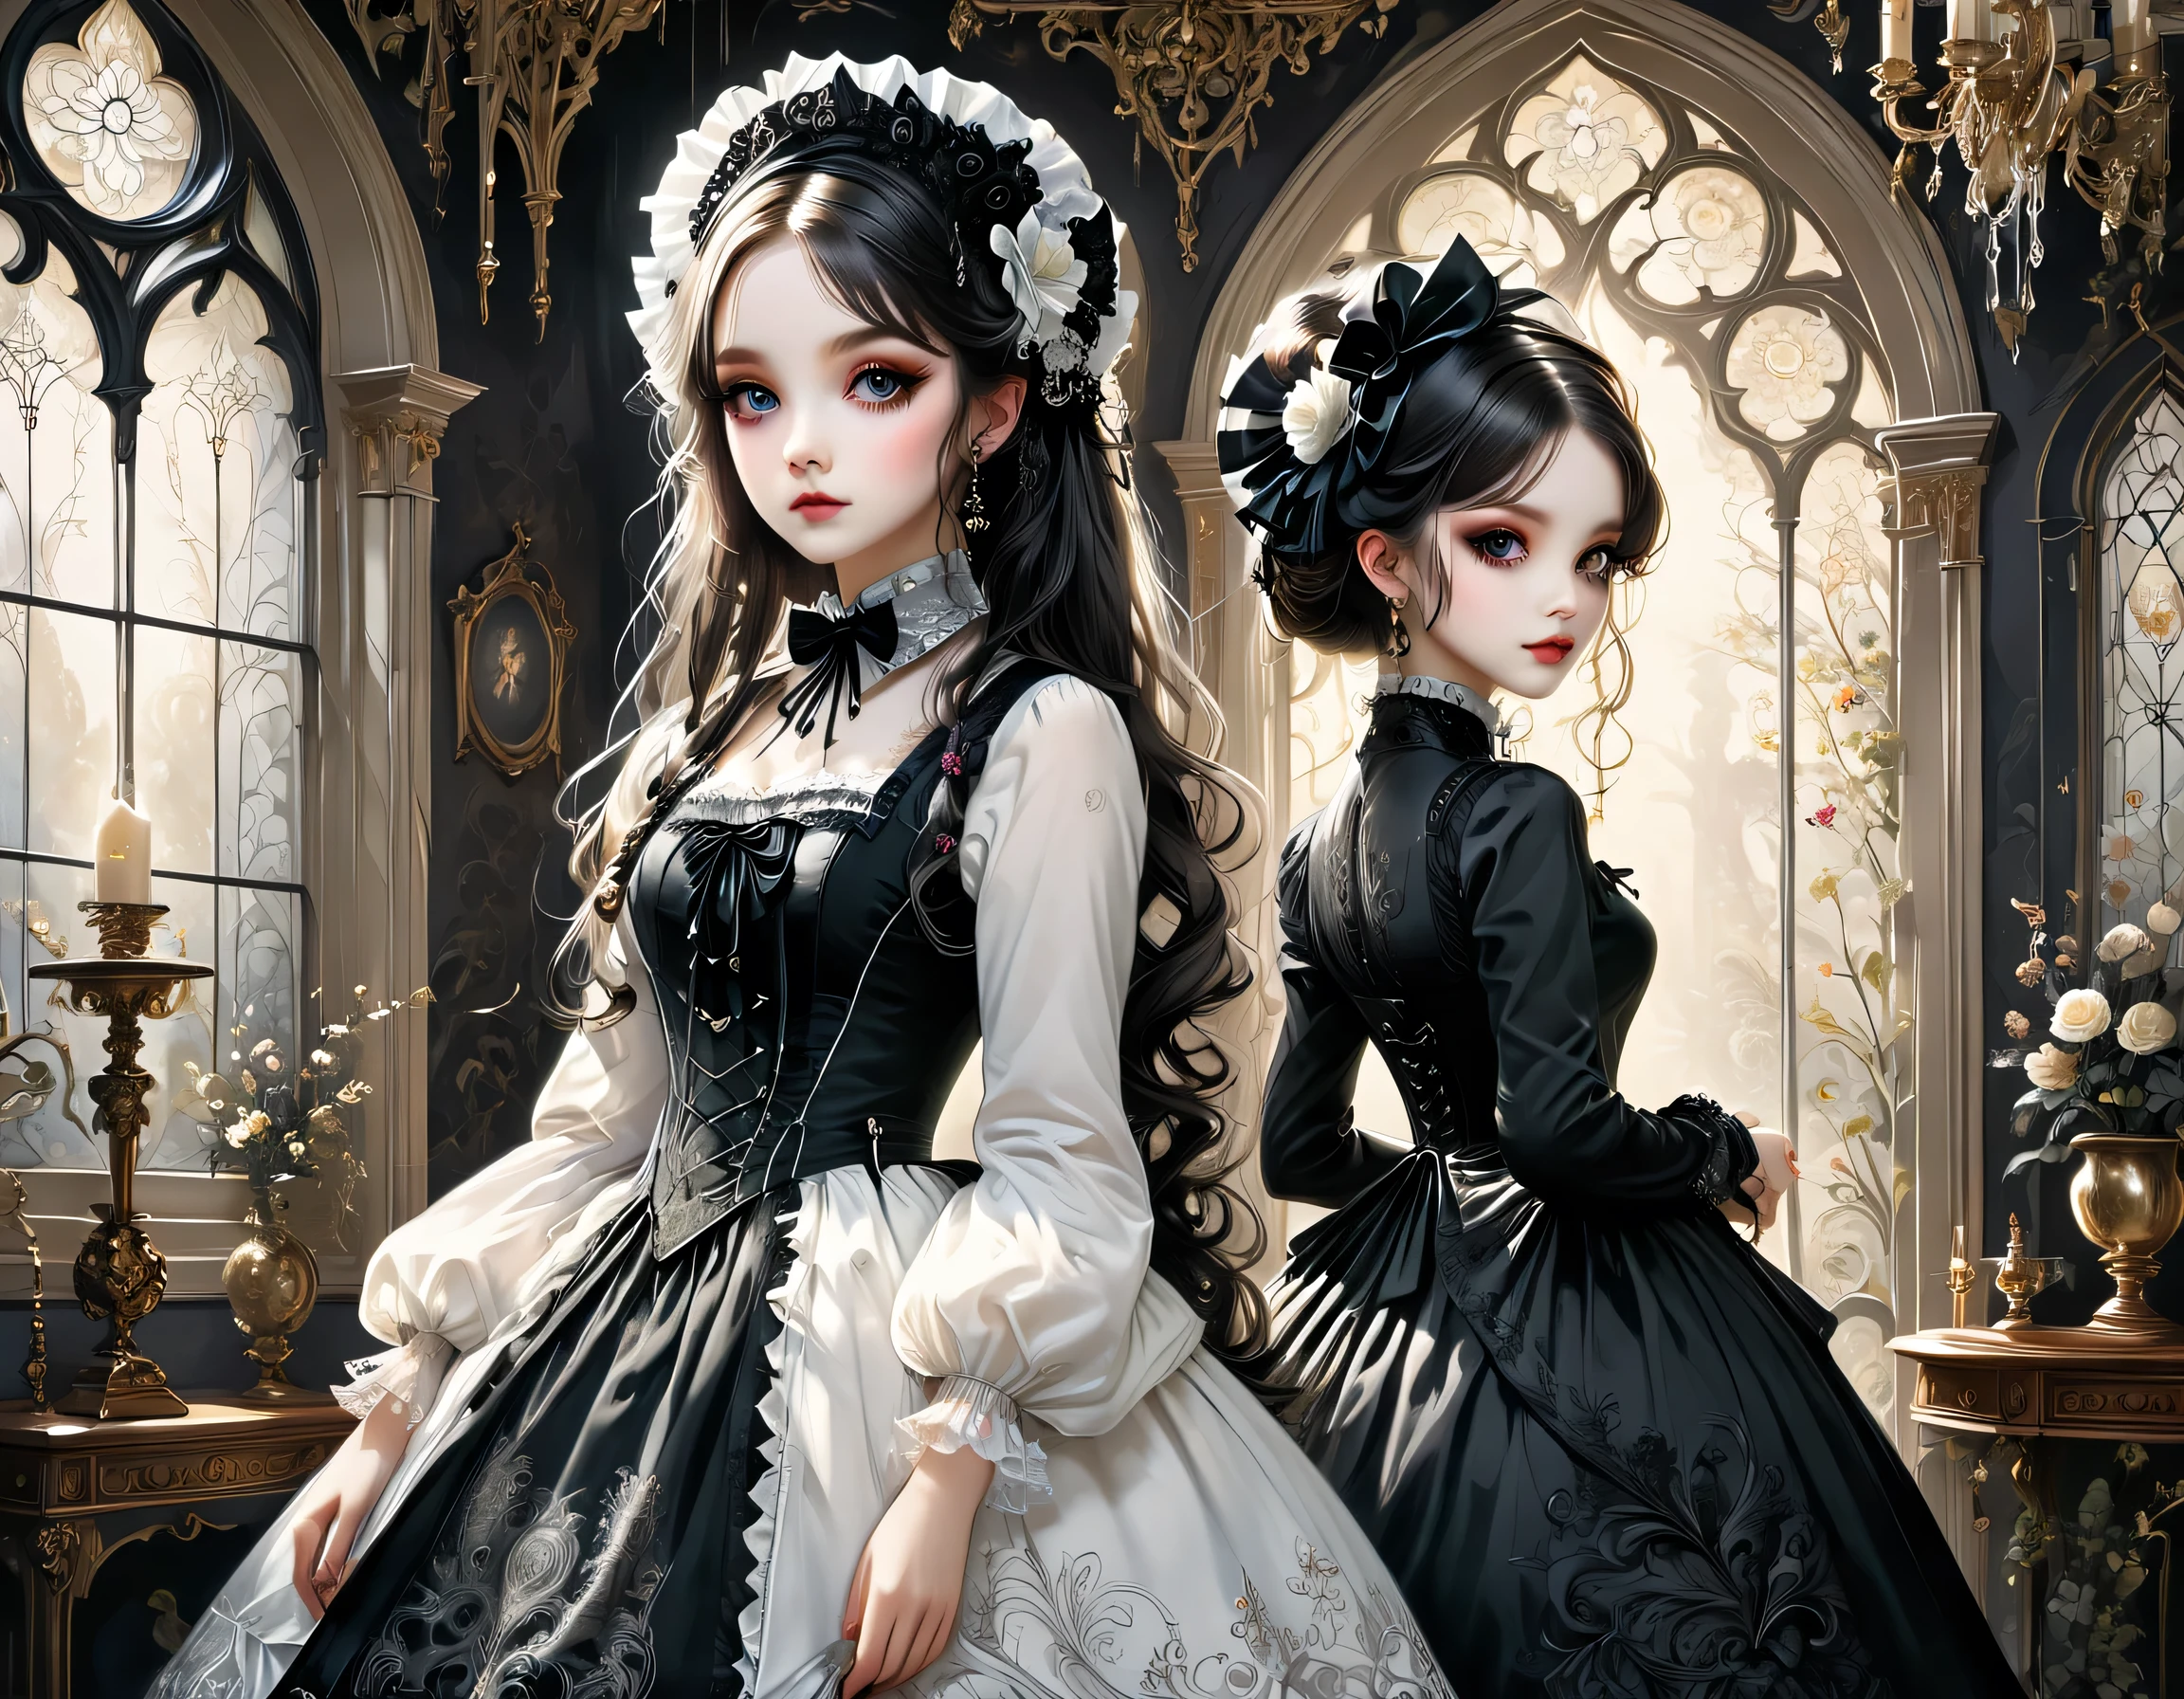 Gothic horror paintings,((Two beautiful girls standing:Symmetric:Gothic Lolita:12 years old:Ephemeral:((Two beautiful girls)):cute:Adorable:Perfect Face:White:eyelash:Big eyes,Smooth Skin,Anatomically correct)),Gothic House,Looking Back,black and white,scary but beautiful,Gothic Beauty,Expressing beautiful madness,Shrouded in mystery,Placing dark clouds that foreshadow tragedy in a beautiful gothic house,,detailed,Use red as an accent color,Race,embroidery,Detailed pattern,rendering,Designer House,Luxury Homes,nice,quiet,Beautiful light and shadow,Gothic Room,Golden Ratio,Anatomically correct,Rococo,BREAK,(The girl on the right(Black Dress)Gothic Lolita),BREAK,(The girl on the left(White Dress)Gothic Lolita),BREAK,embroidery,Detailed pattern,Complex details,rendering,Zentangle Elements,Beautiful Gothic Horror,masterpiece,The best masterpiece,Carefully draw down to the smallest detail,Gothic Housedetailed,Light from the window,Beautiful light and shadow,Gothic Makeup